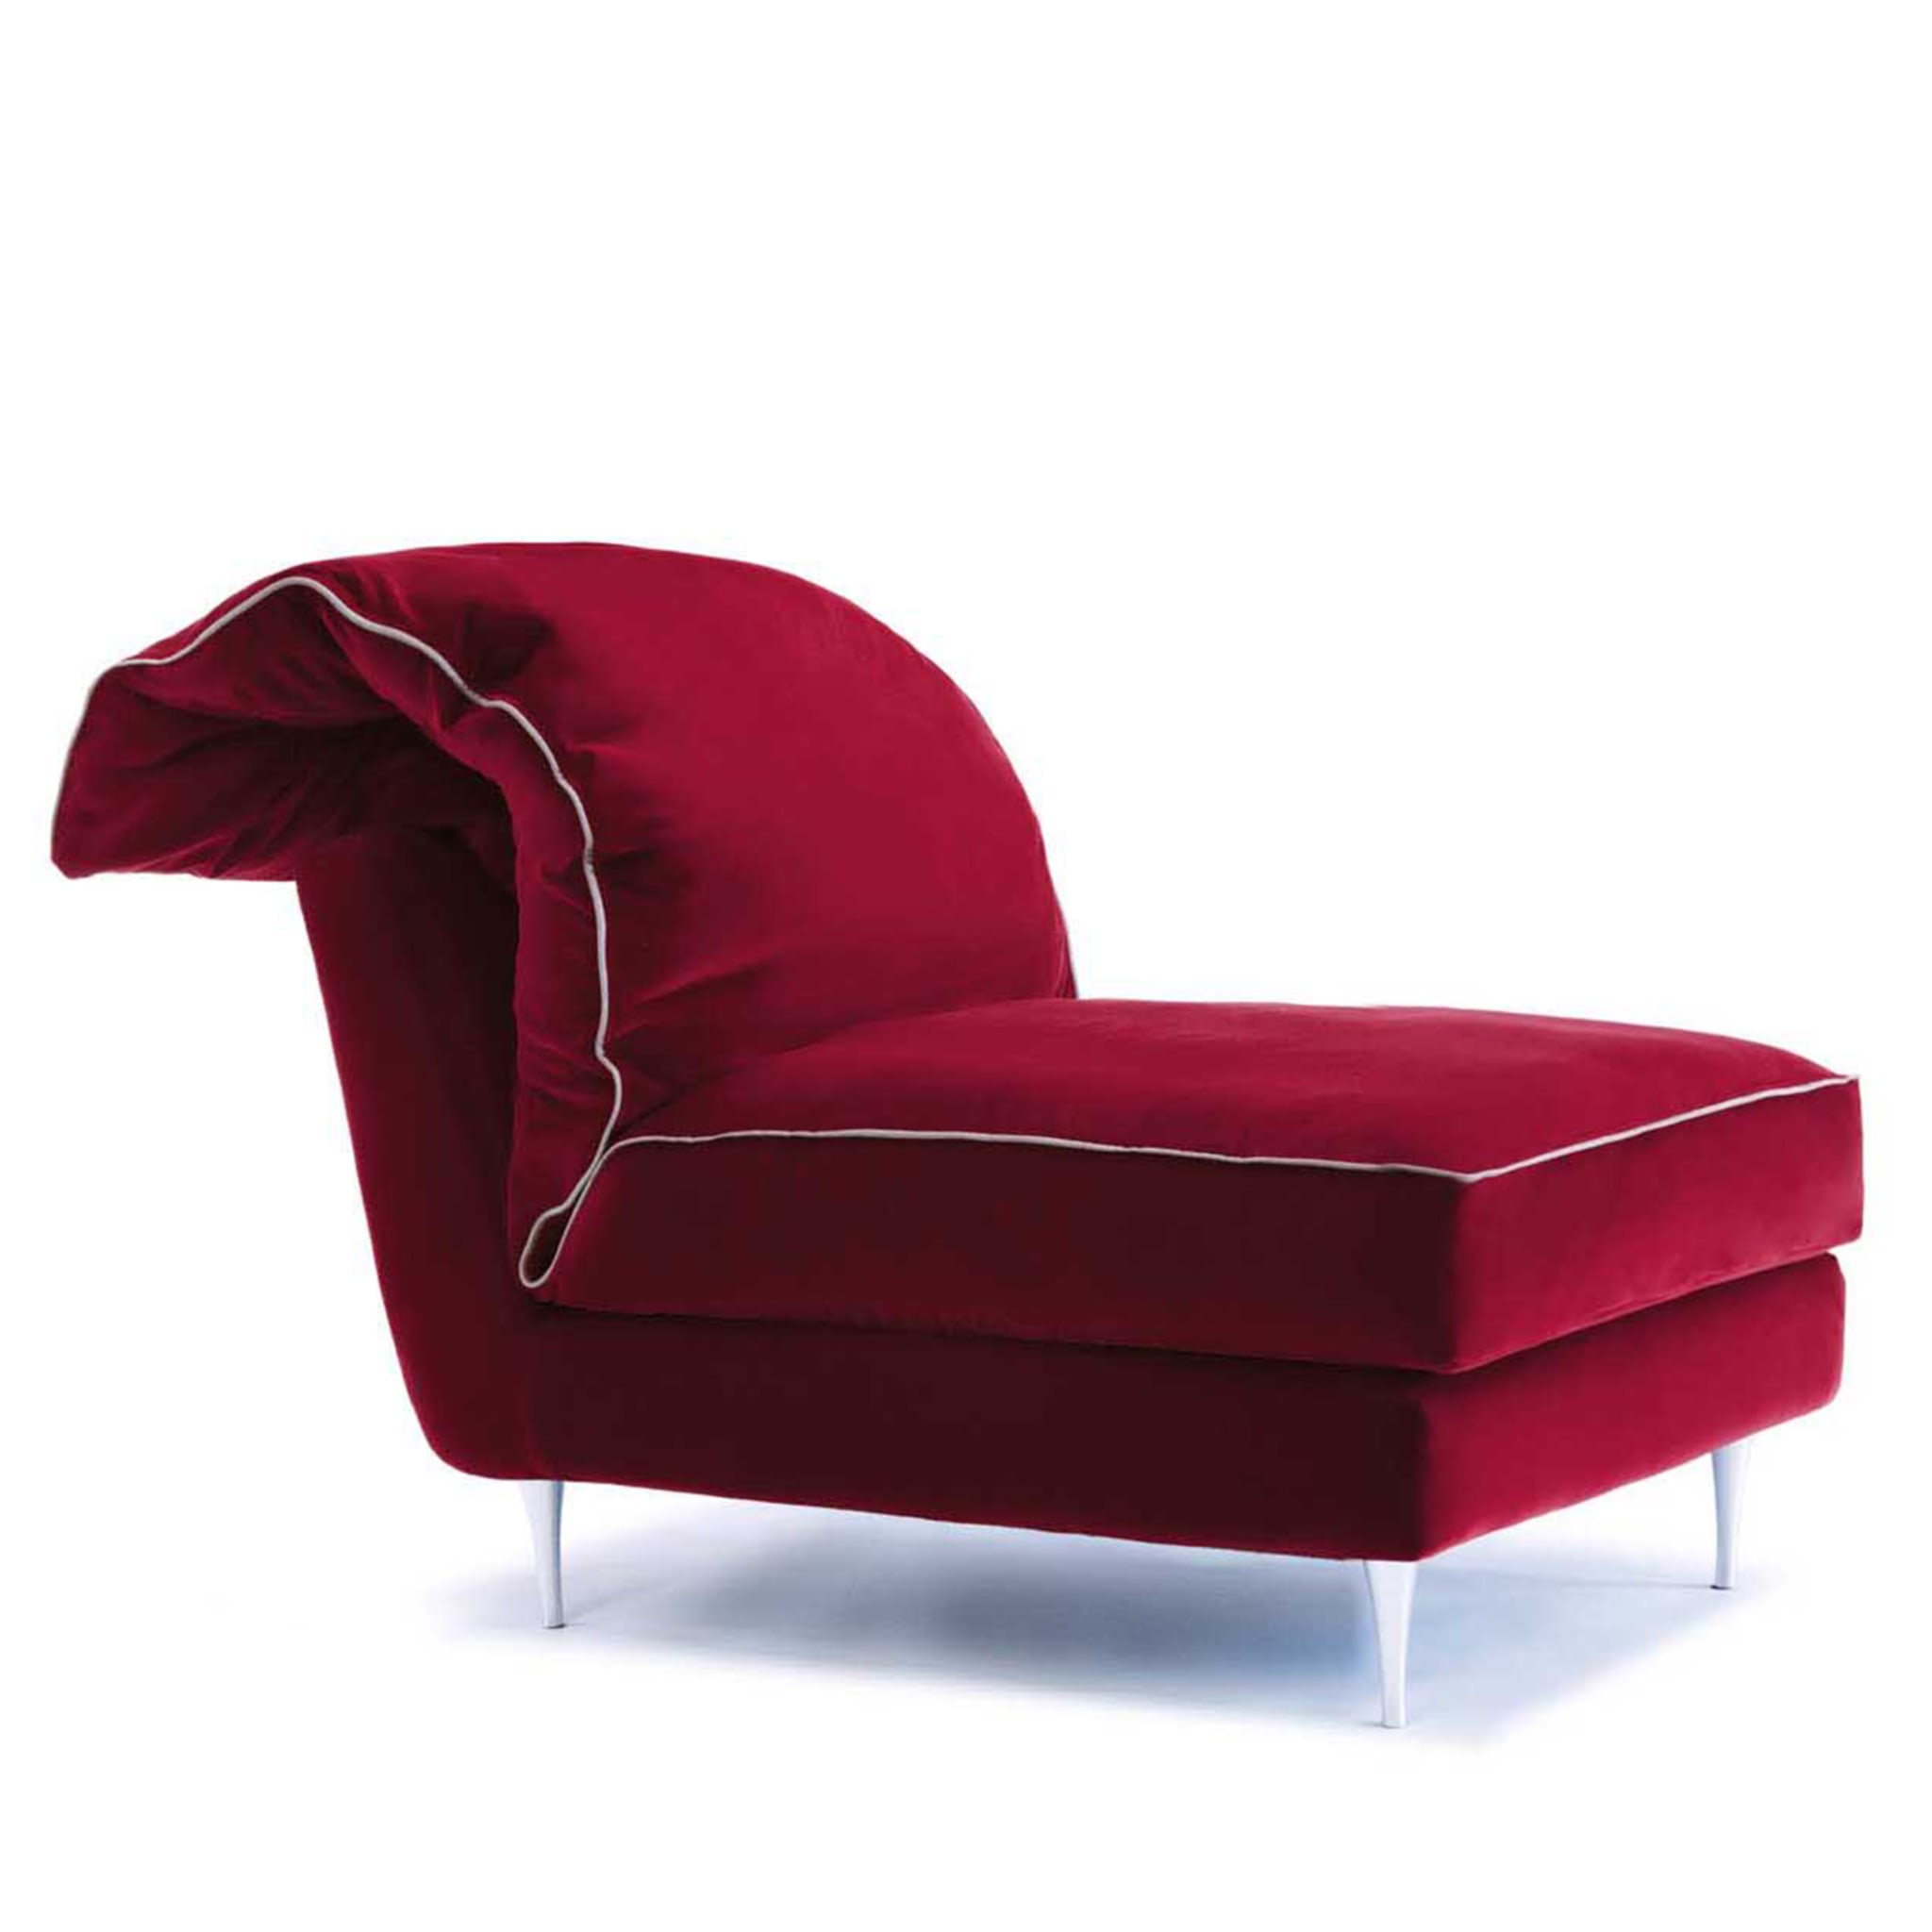 Casquet Mini in Passion Red Velvet Daybed - Alternative view 2